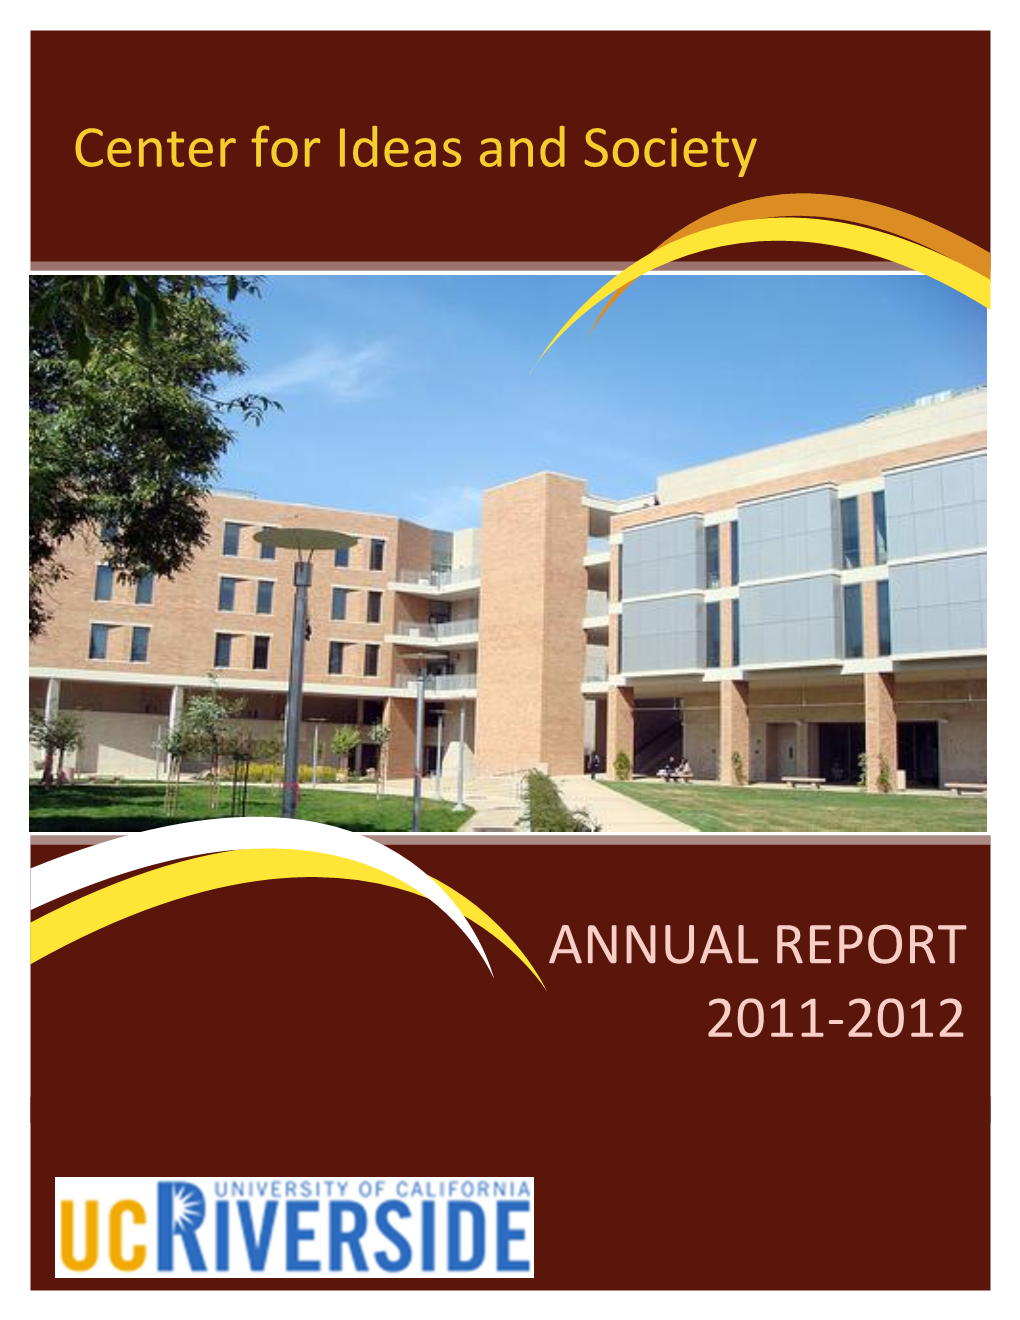 Center for Ideas and Society ANNUAL REPORT 2011-2012